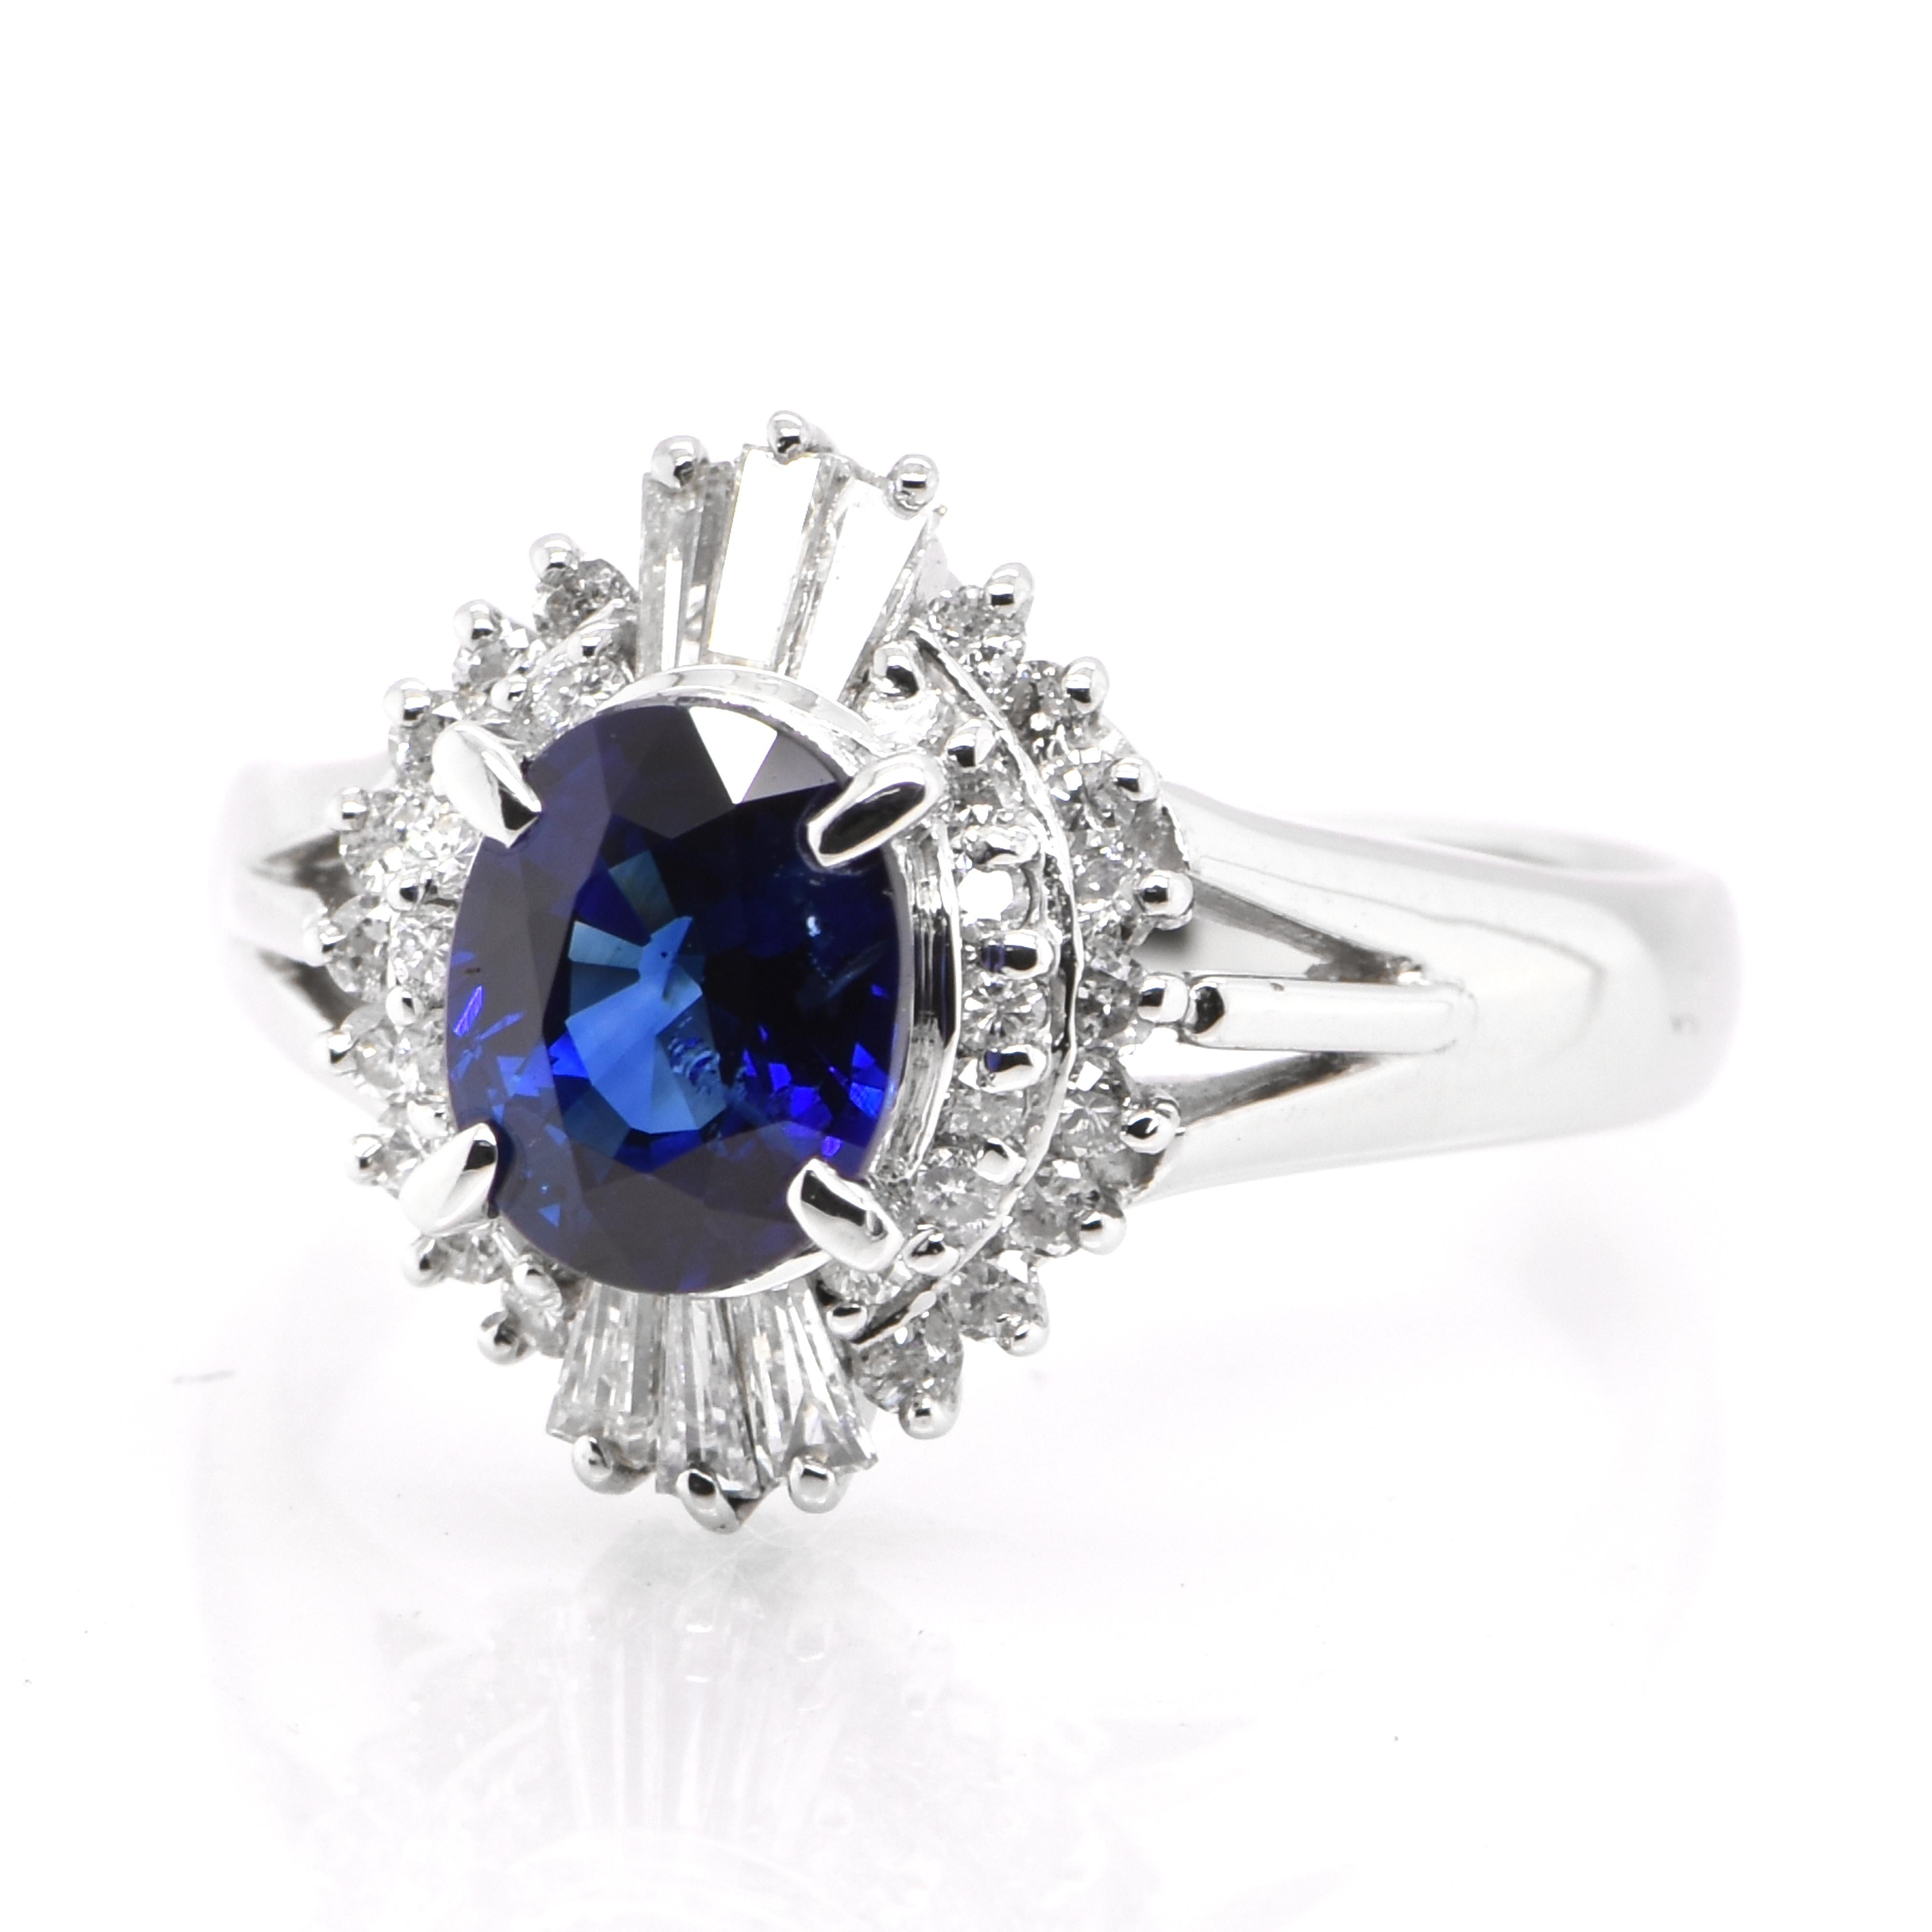 A beautiful ring featuring 1.06 Carat Natural Blue Sapphire and 0.24 Carats Diamond Accents set in Platinum. Sapphires have extraordinary durability - they excel in hardness as well as toughness and durability making them very popular in jewelry.